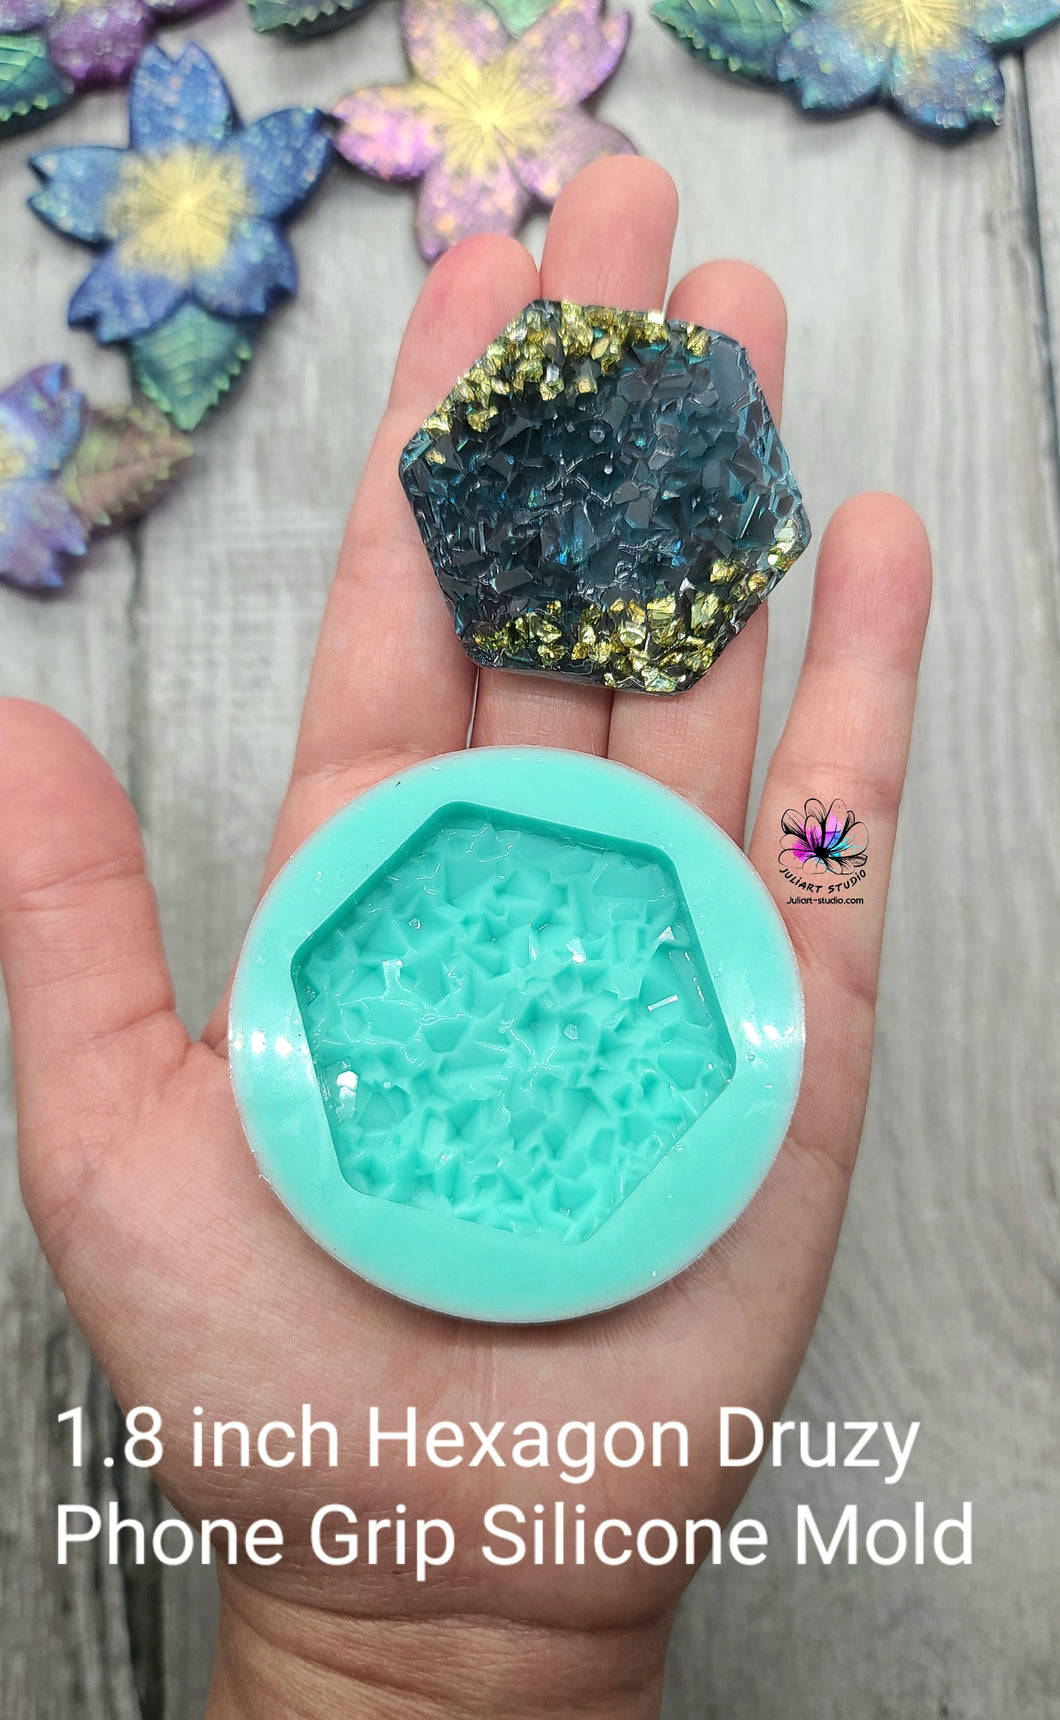 1.8 inch Hexagon Druzy Phone Grip Silicone Mold for Resin